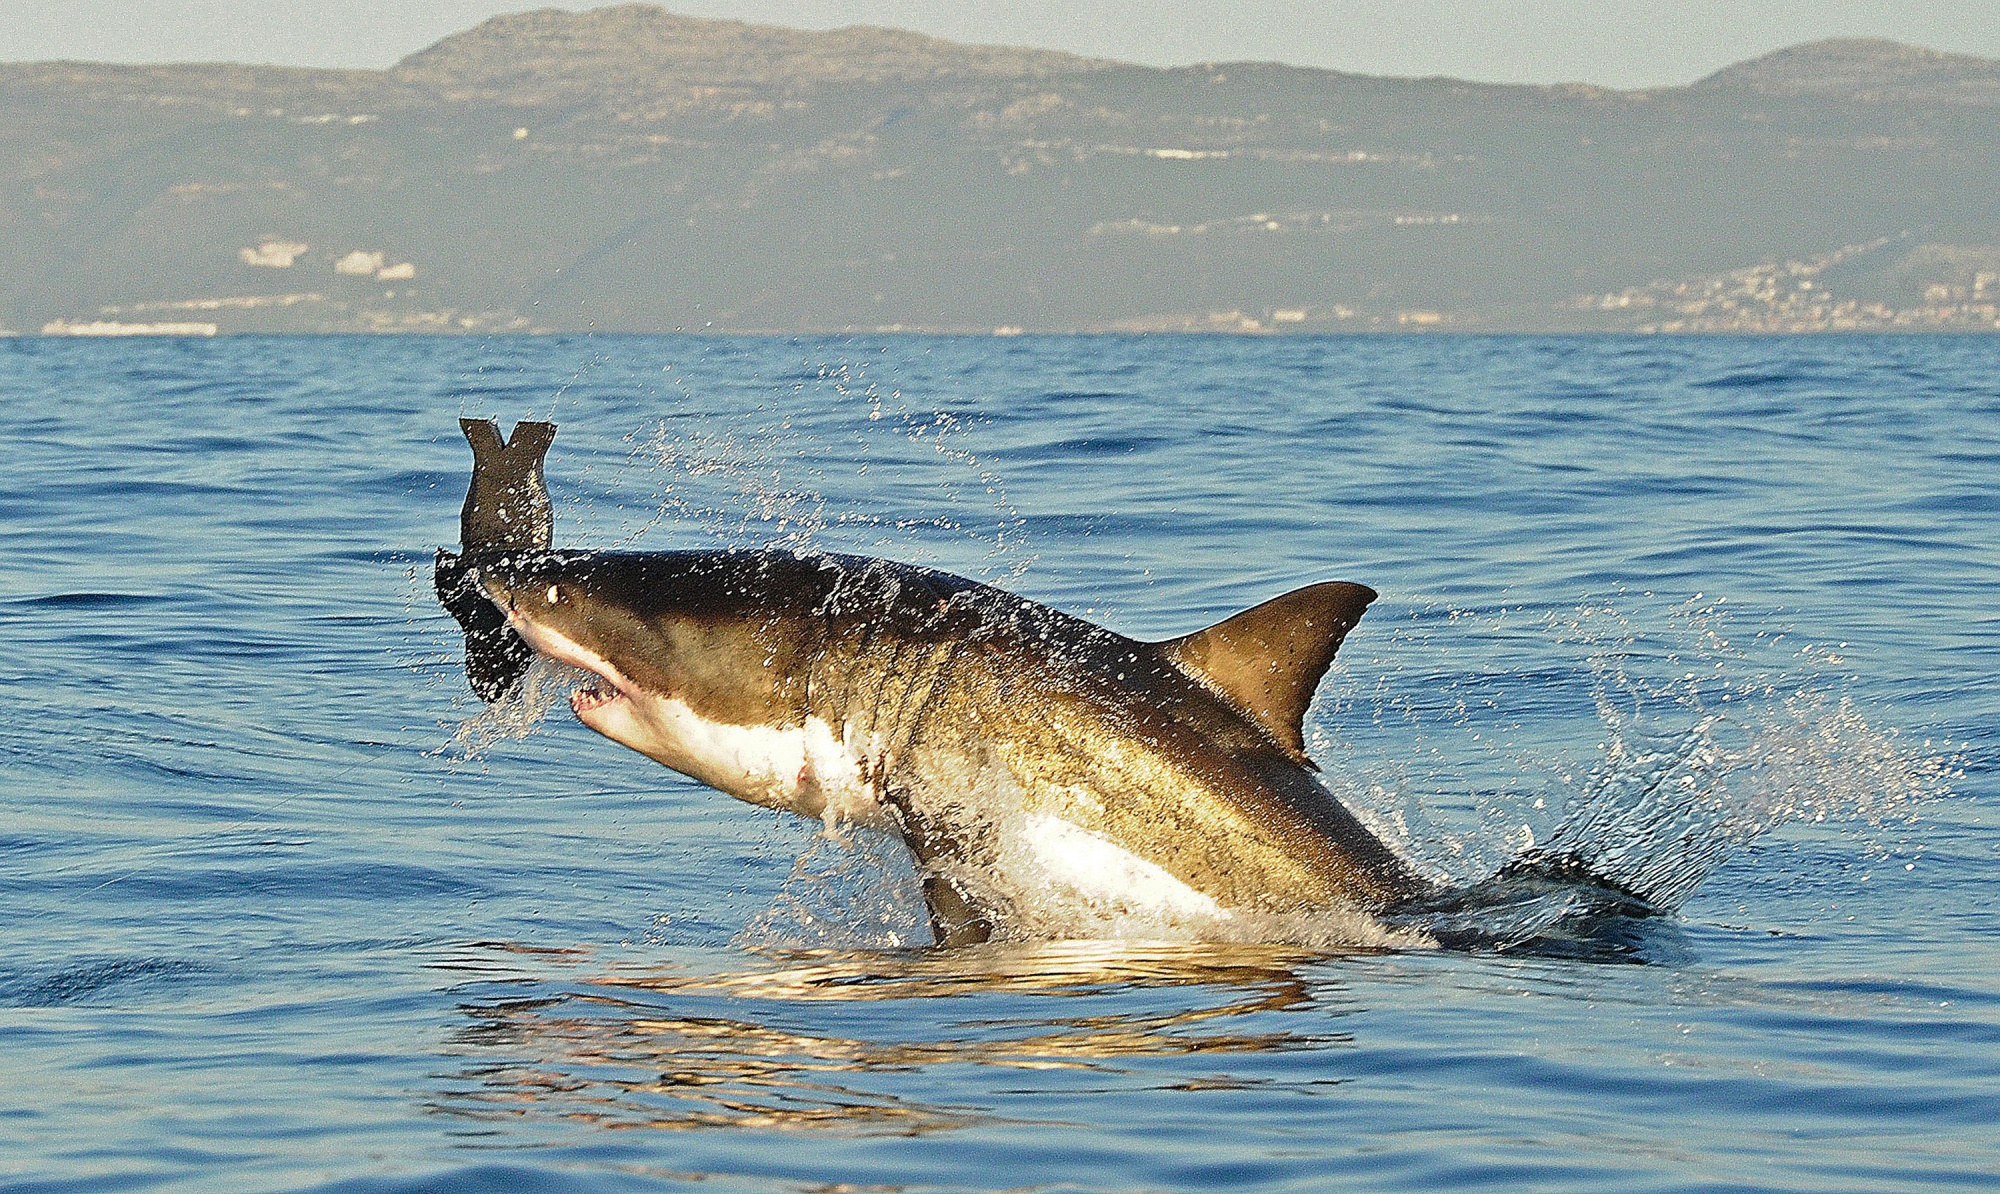 There has only been one confirmed sighting of a great white shark in False Bay in over two years.